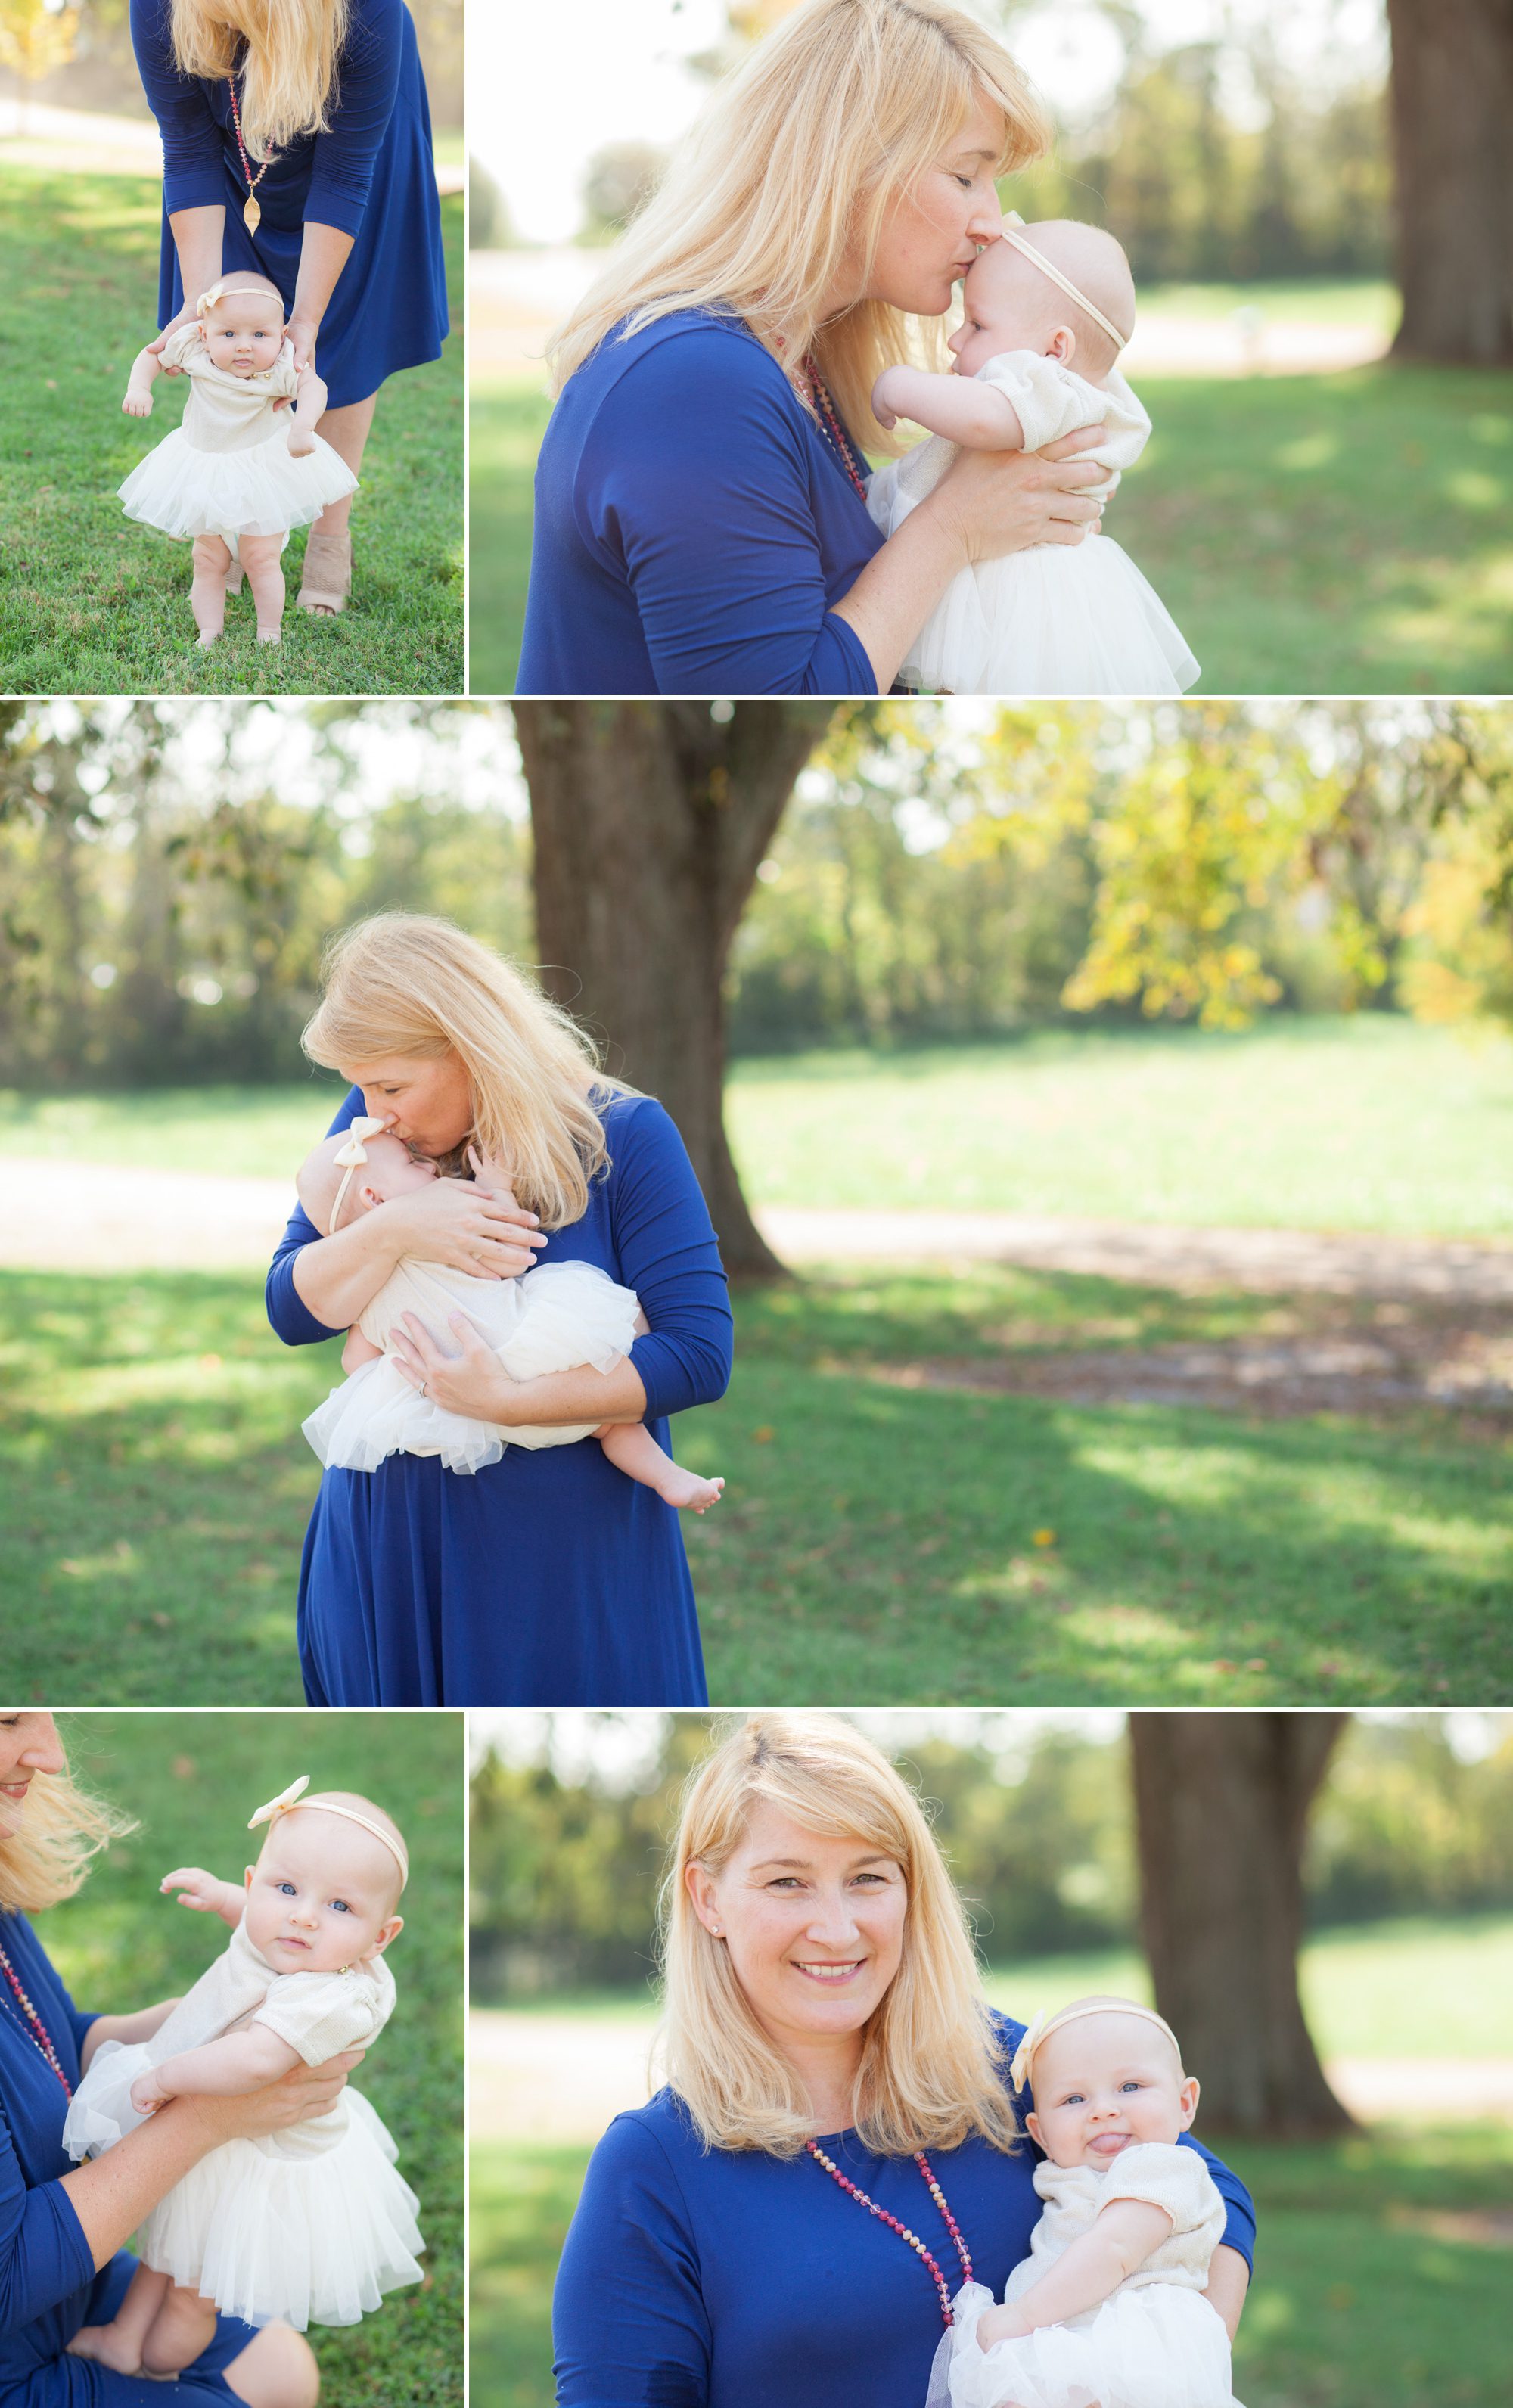 3 month baby and family photography shoot for Shelby and family, Nashville Thompson Station photographer, Homestead Manor Photo by Krista Lee Photography 